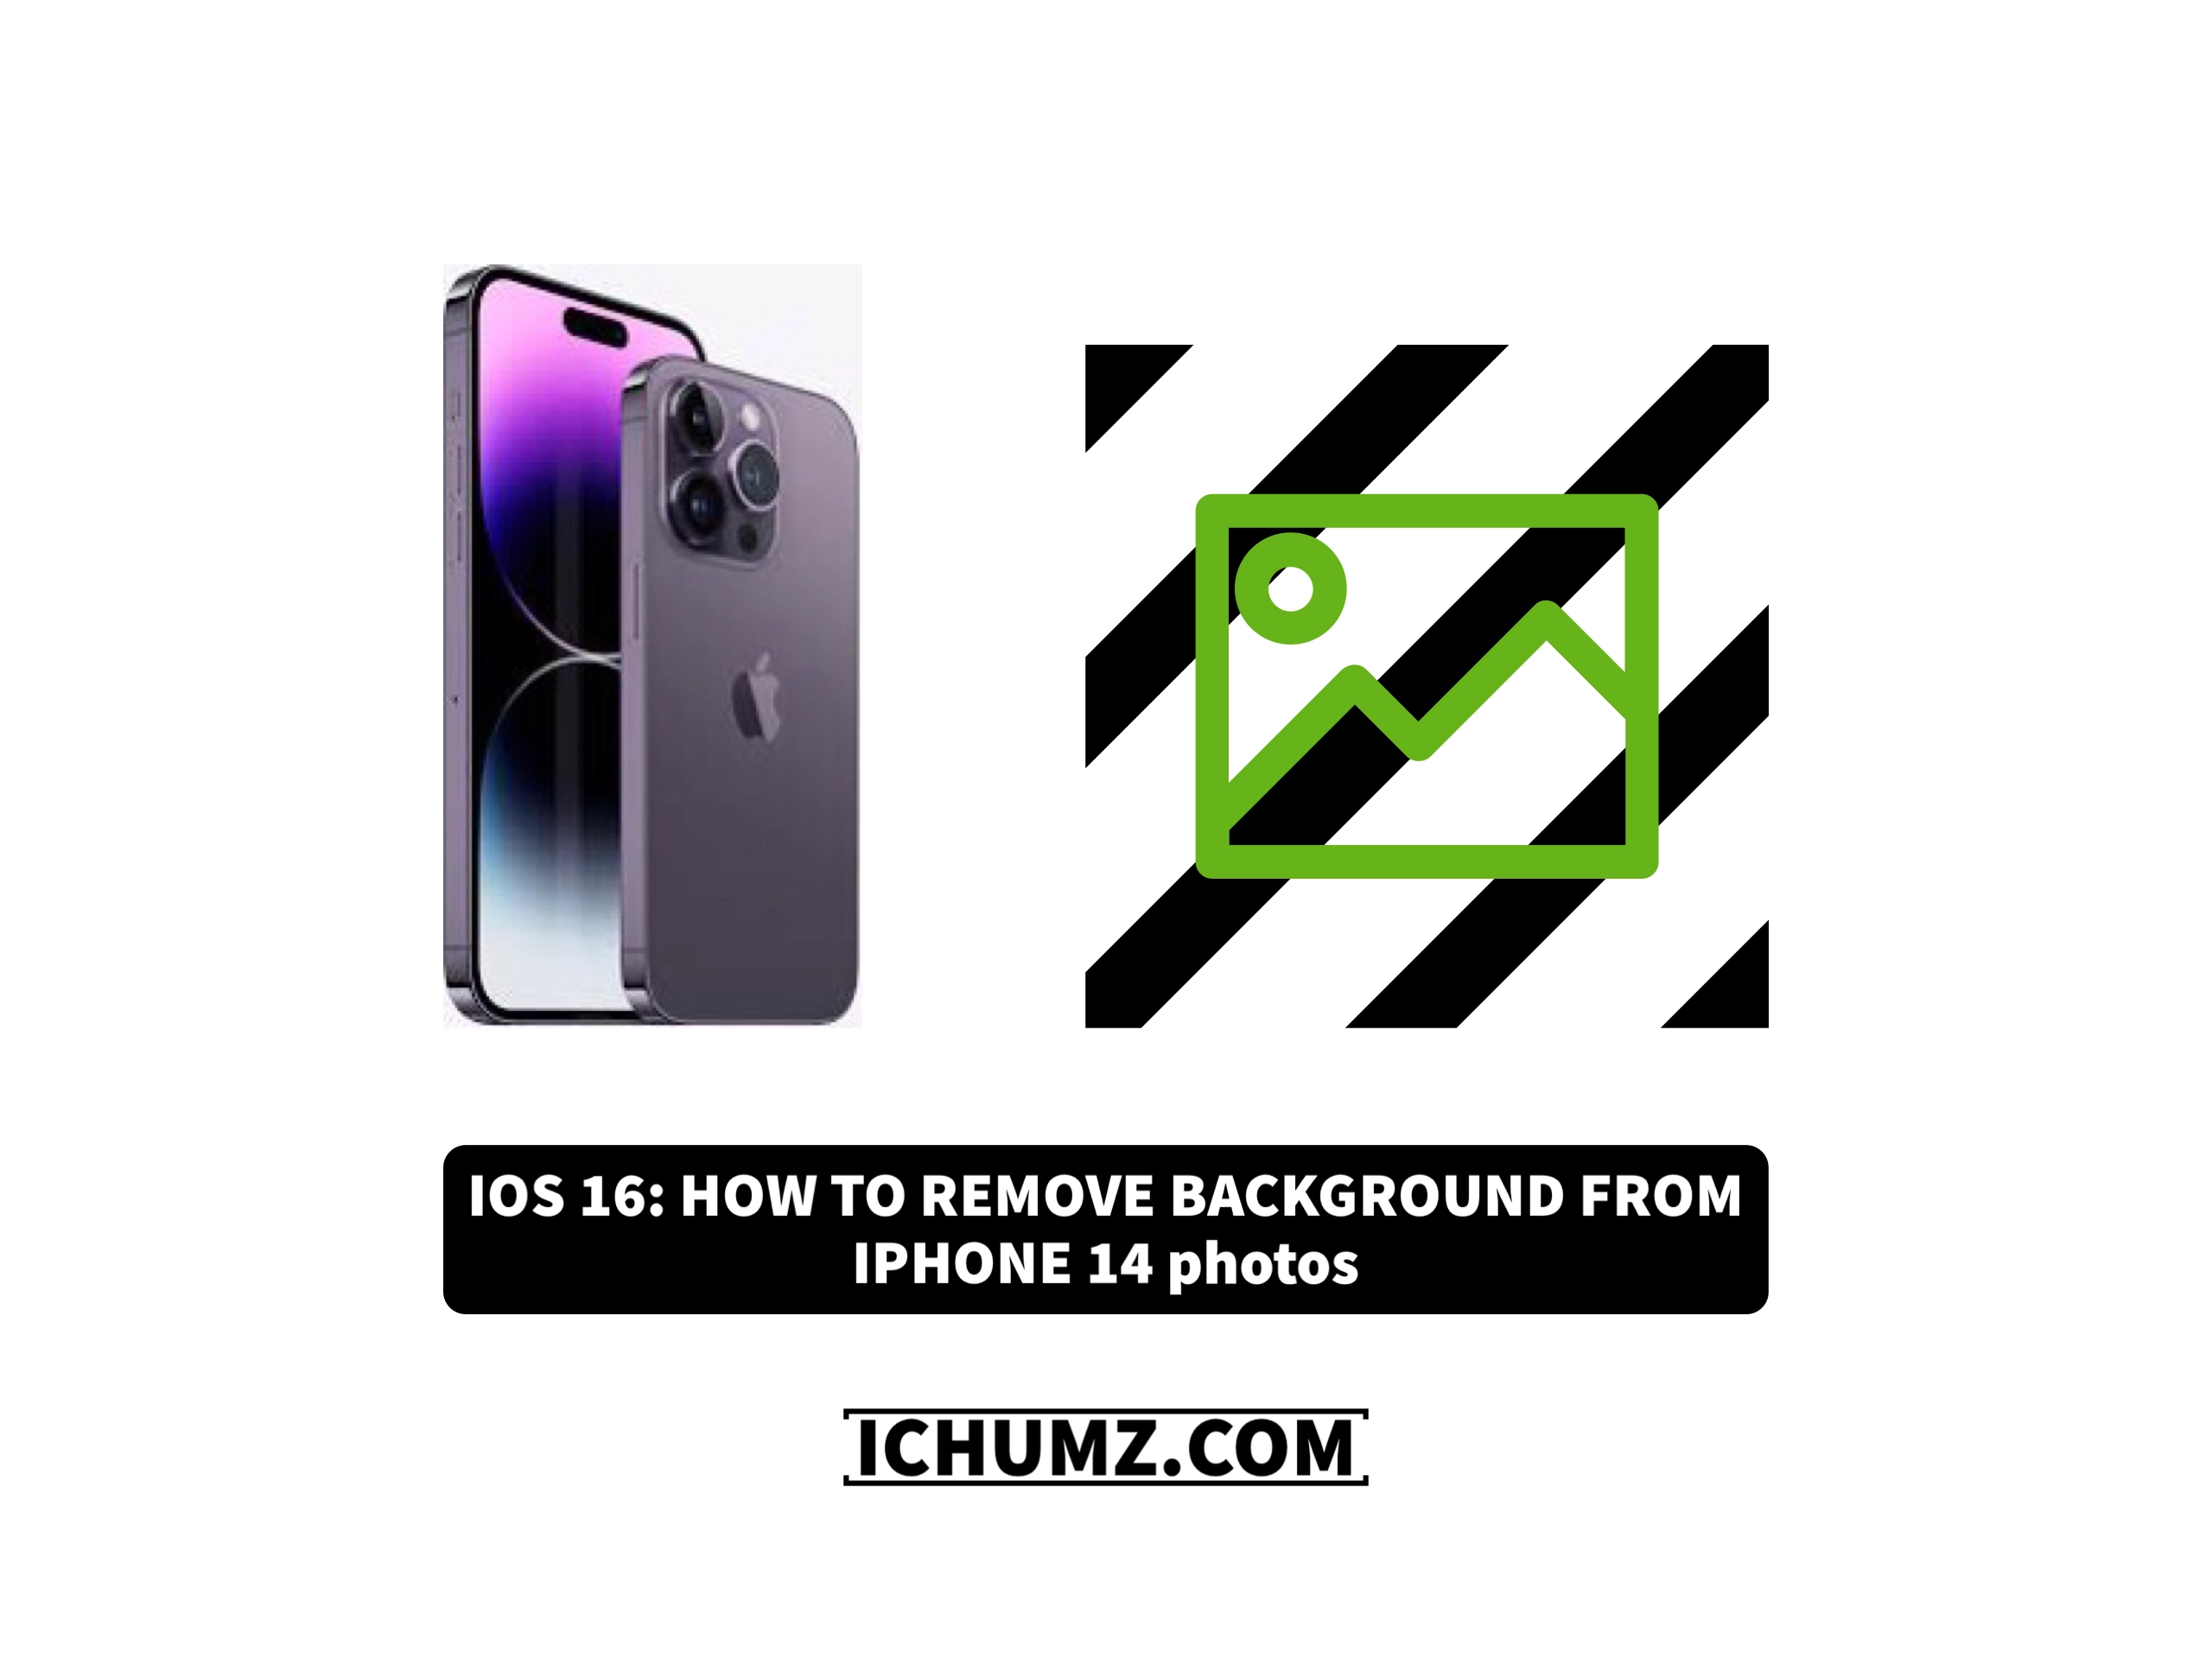 iOS 16: How To Remove Background From iPhone 14 Photos - iChumz